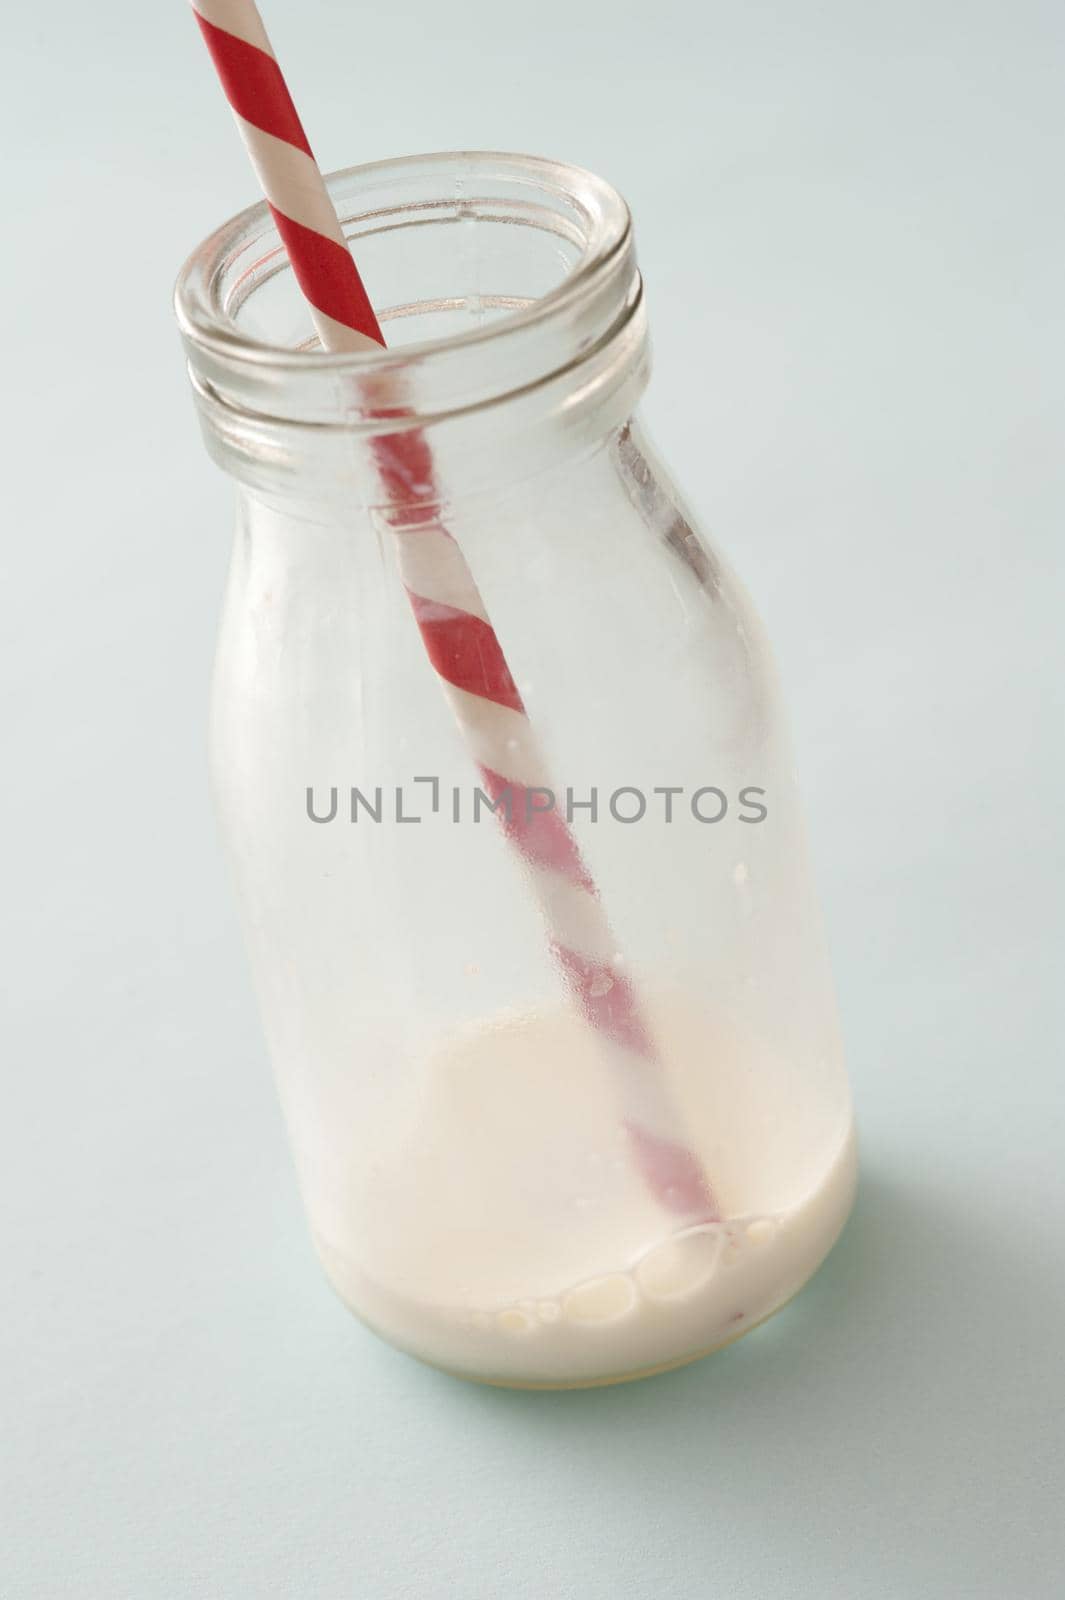 Remnants of milk in a glass bottle with straw after the contents have been drunk or consumed in a healthy diet concept